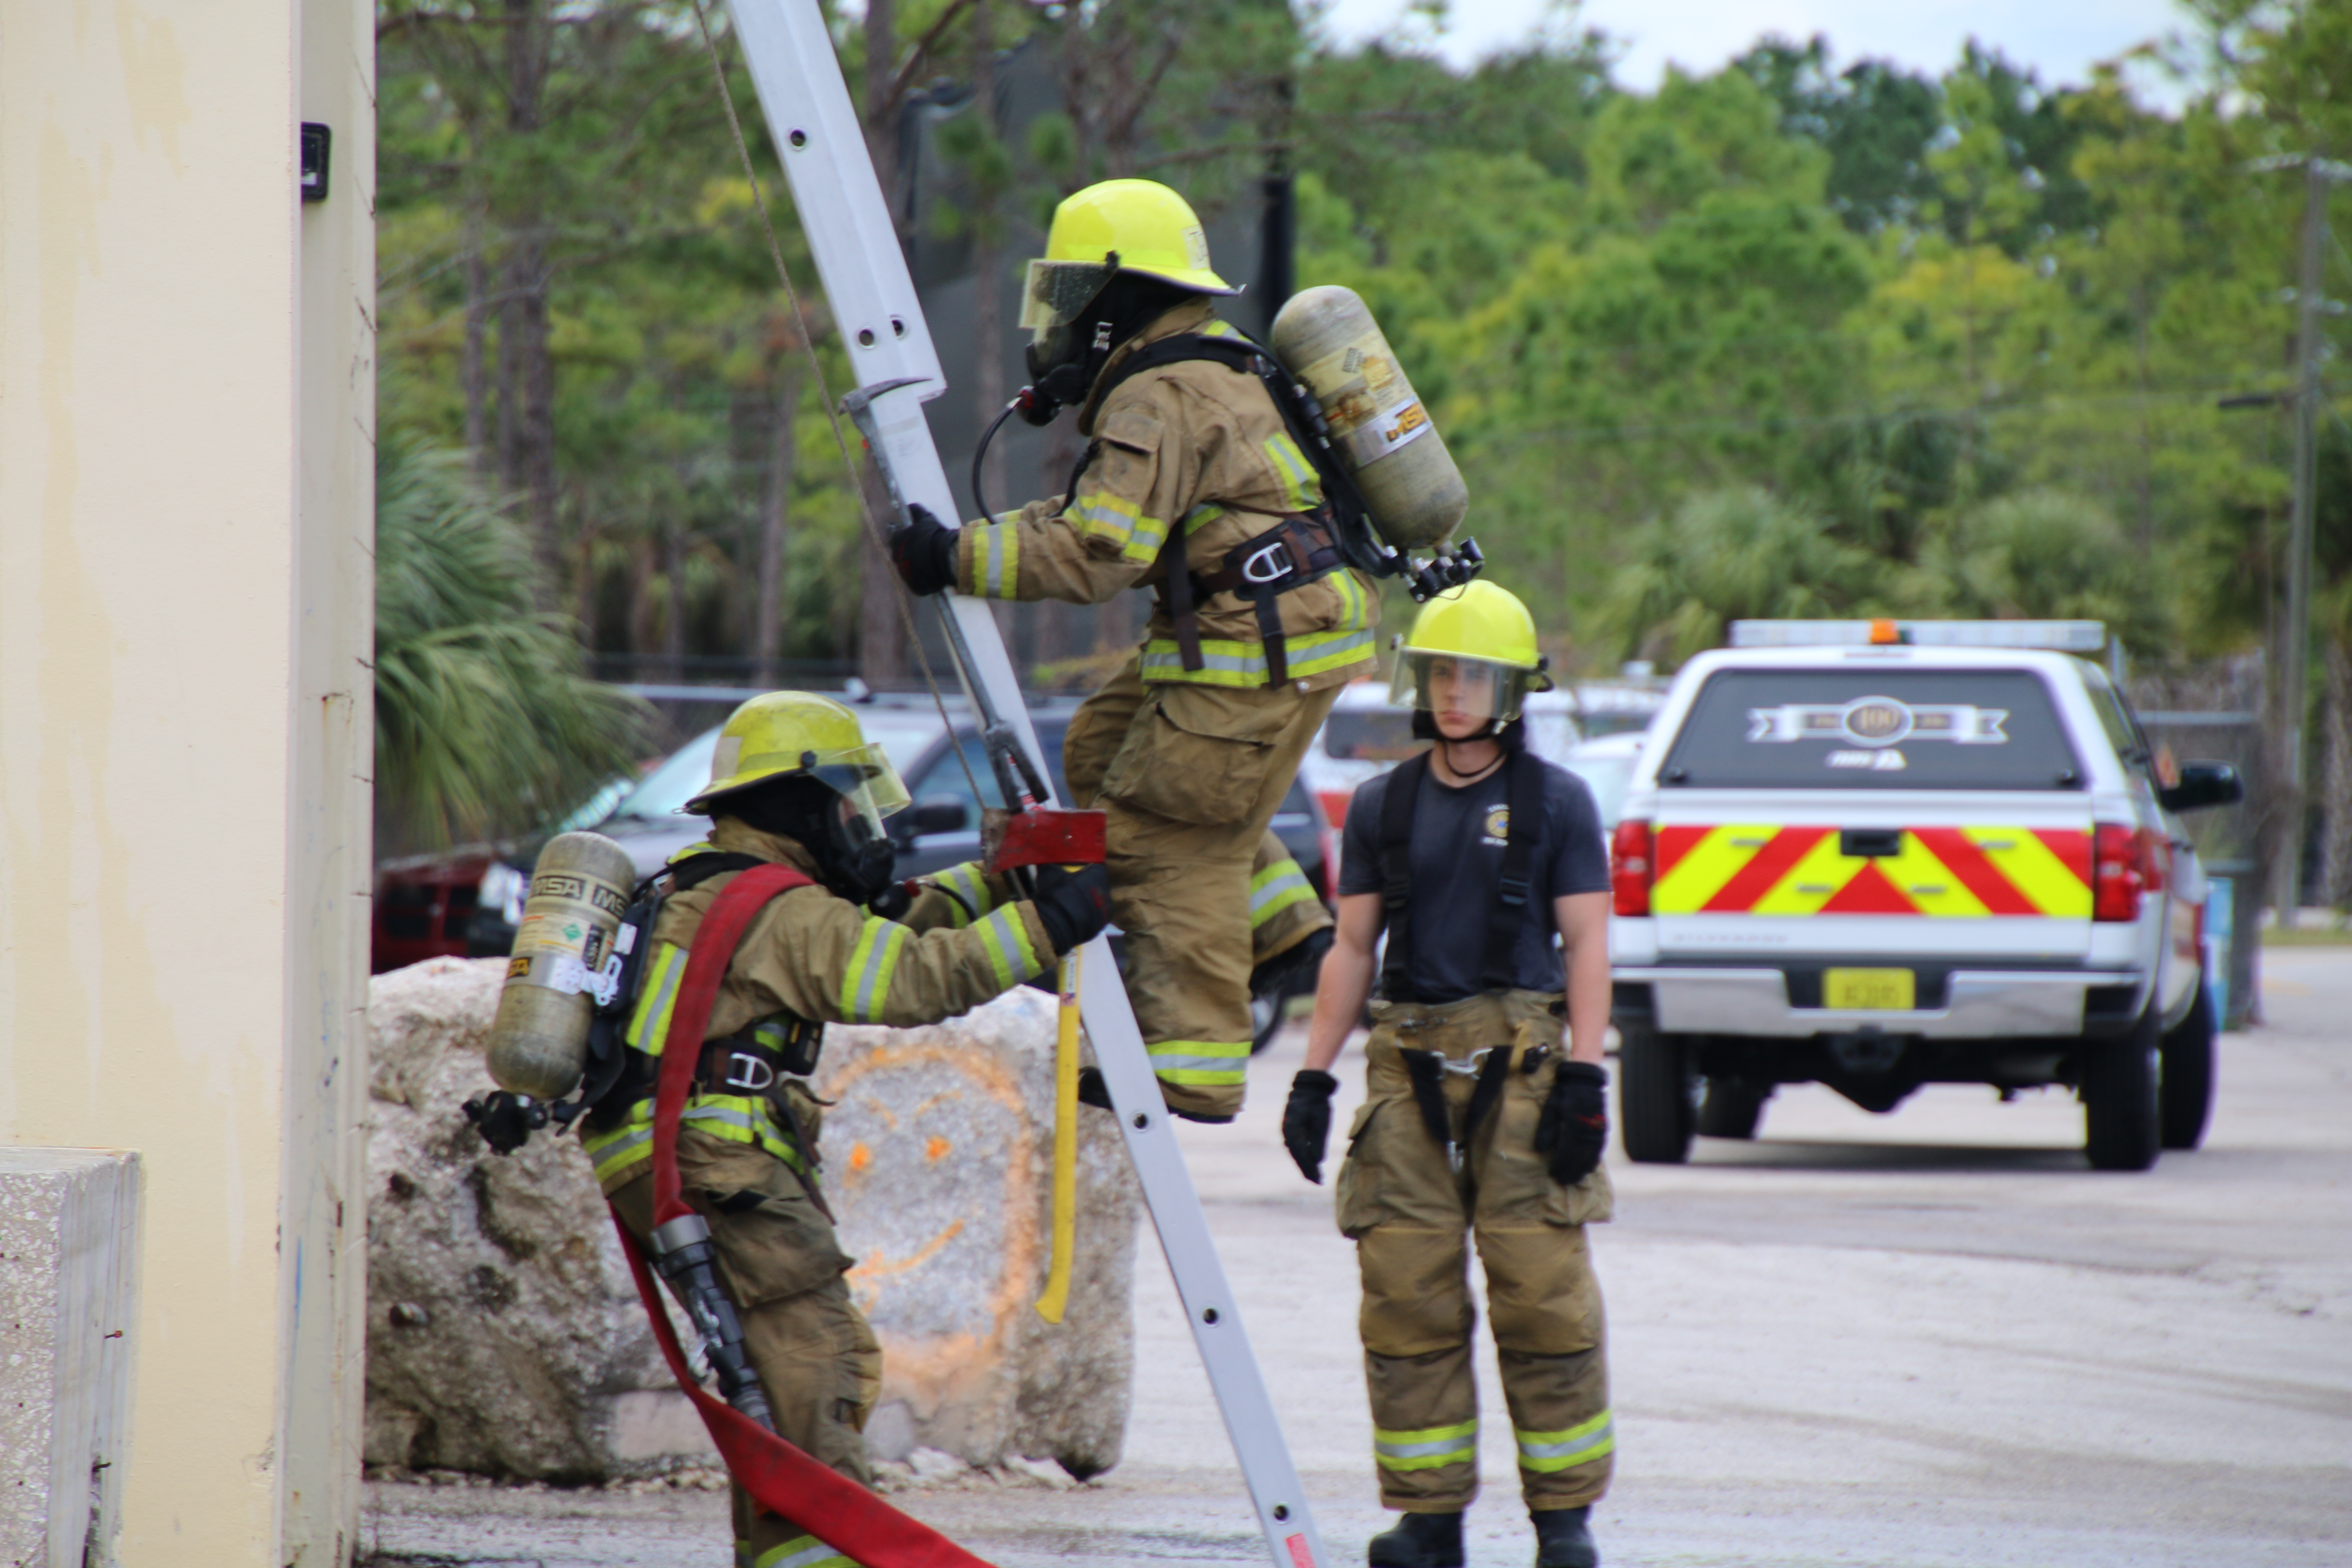 A picture of firefighters during Scenario Training